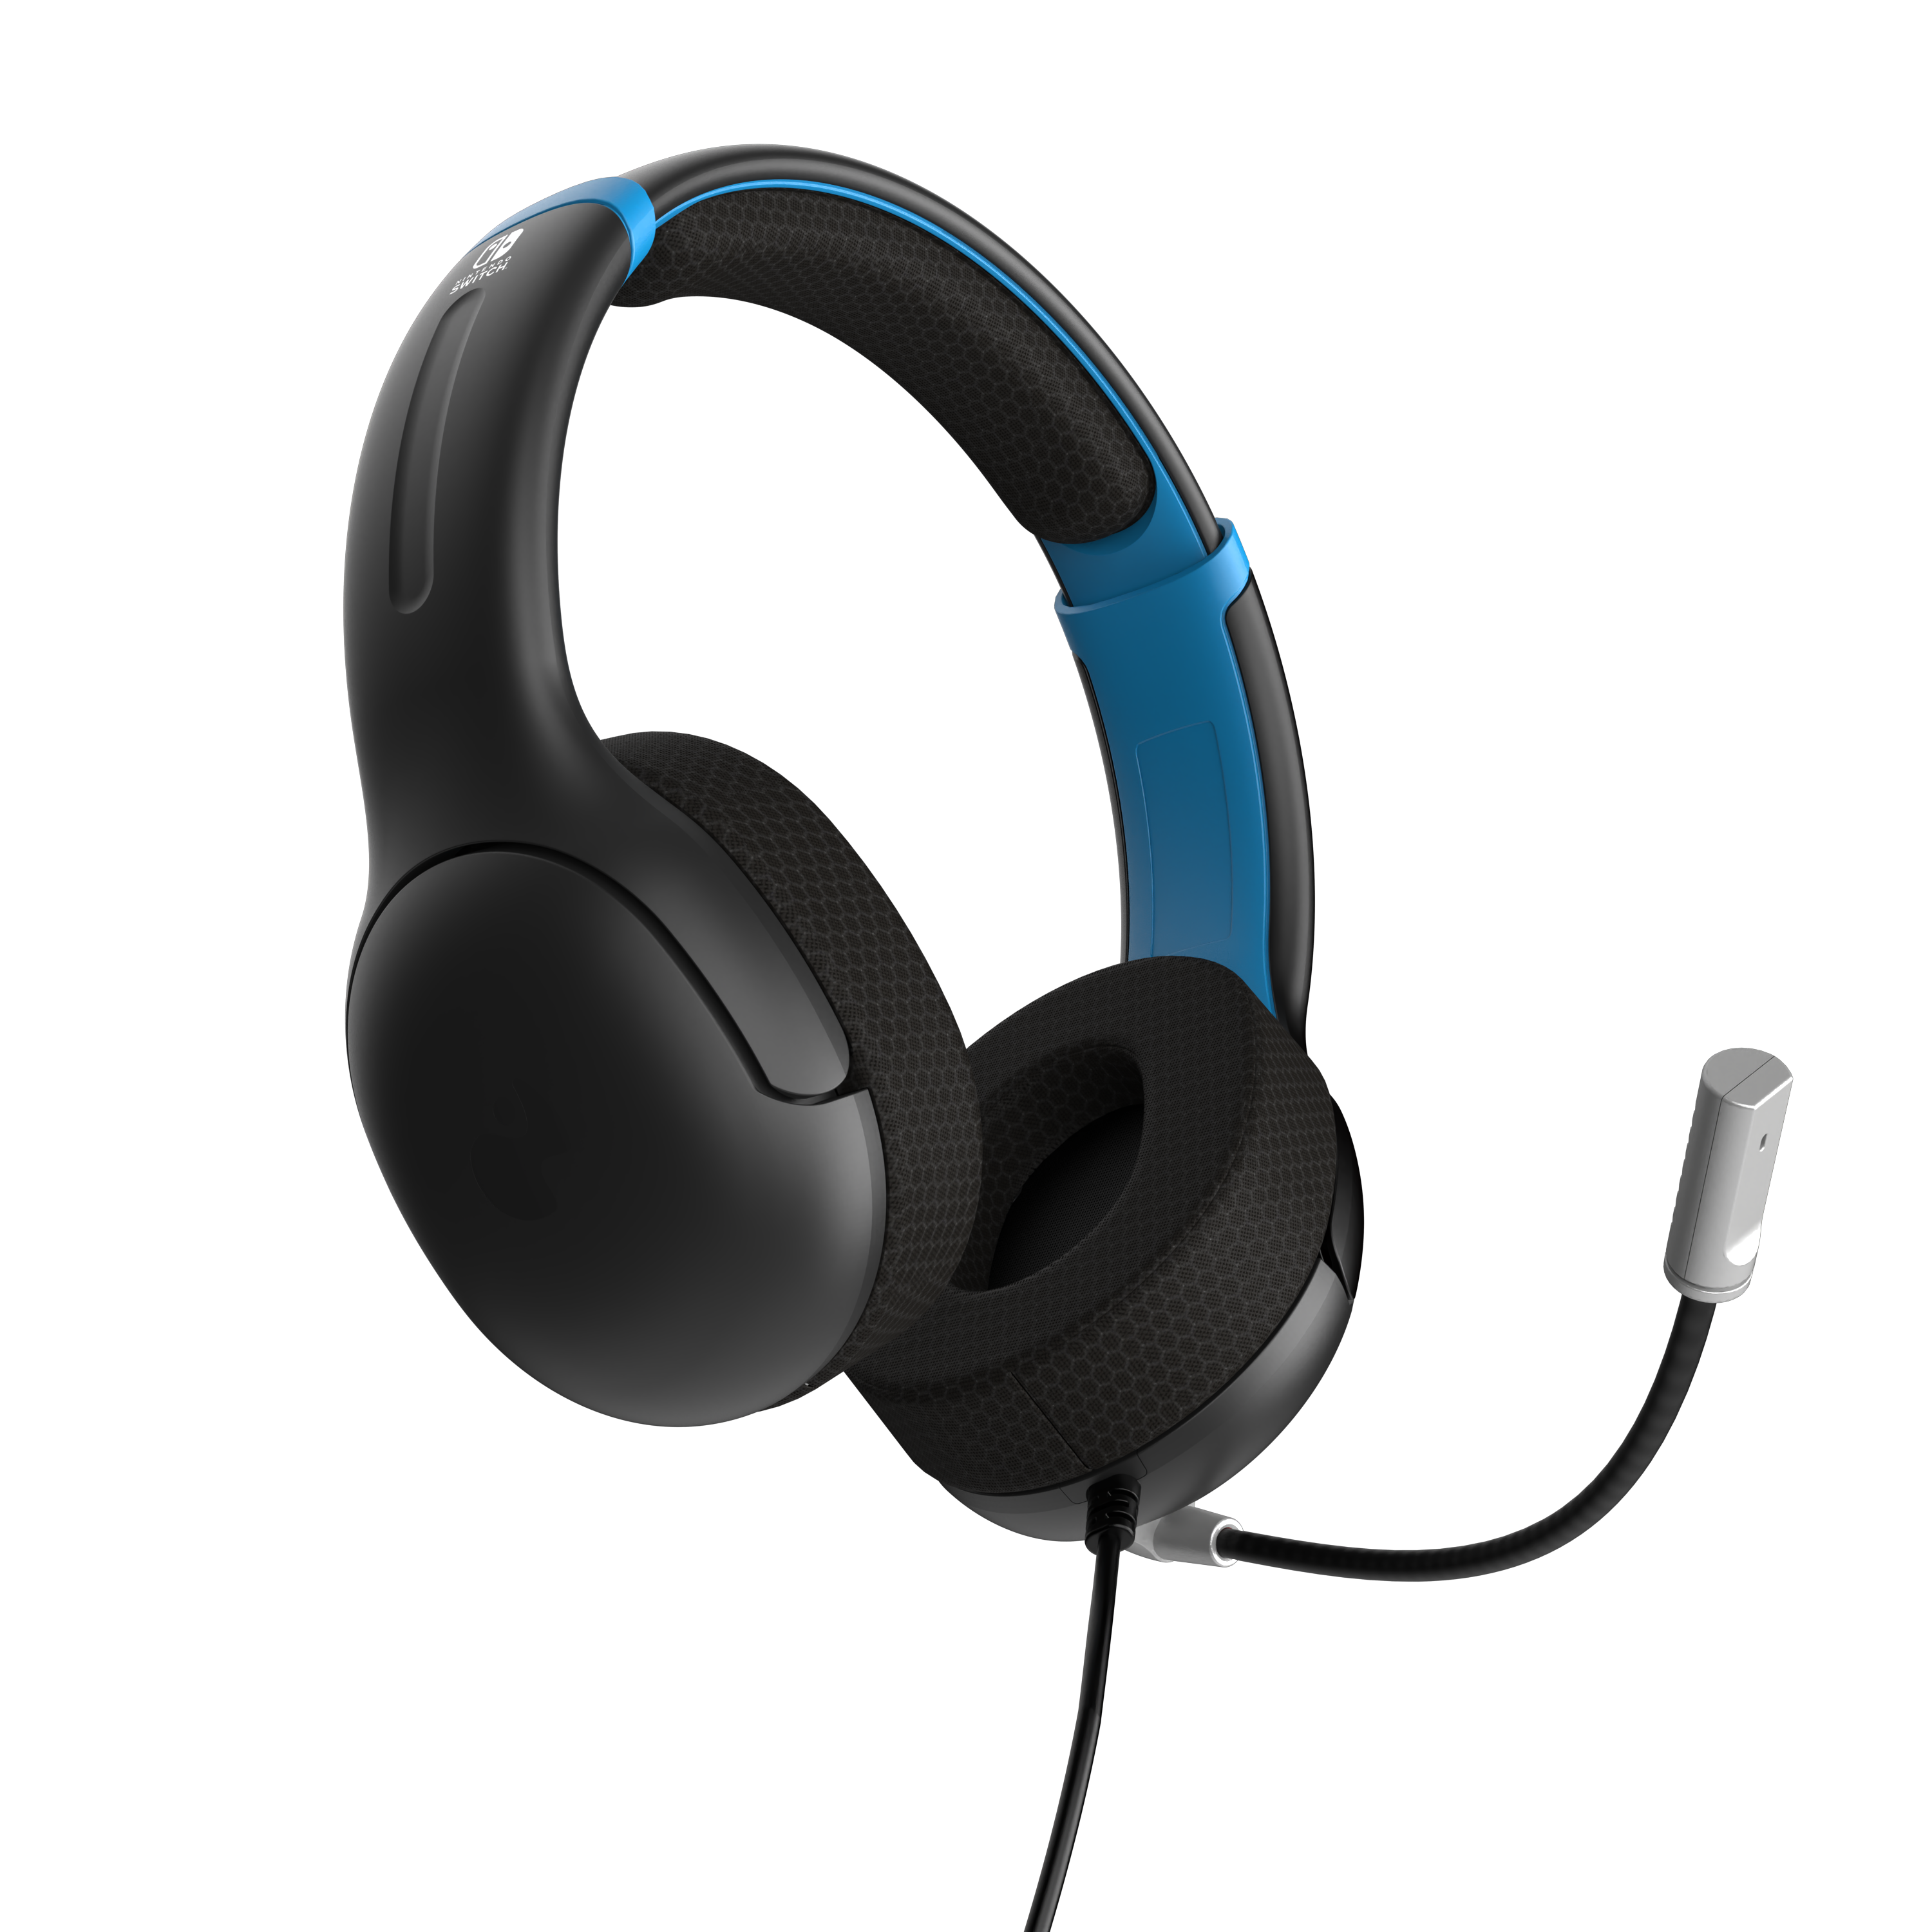 PDP Airlite Wired Headset: Moonlight Black for Nintendo Switch, Nintendo Switch - OLED Model, and Nintendo Switch Lite, Refurbished